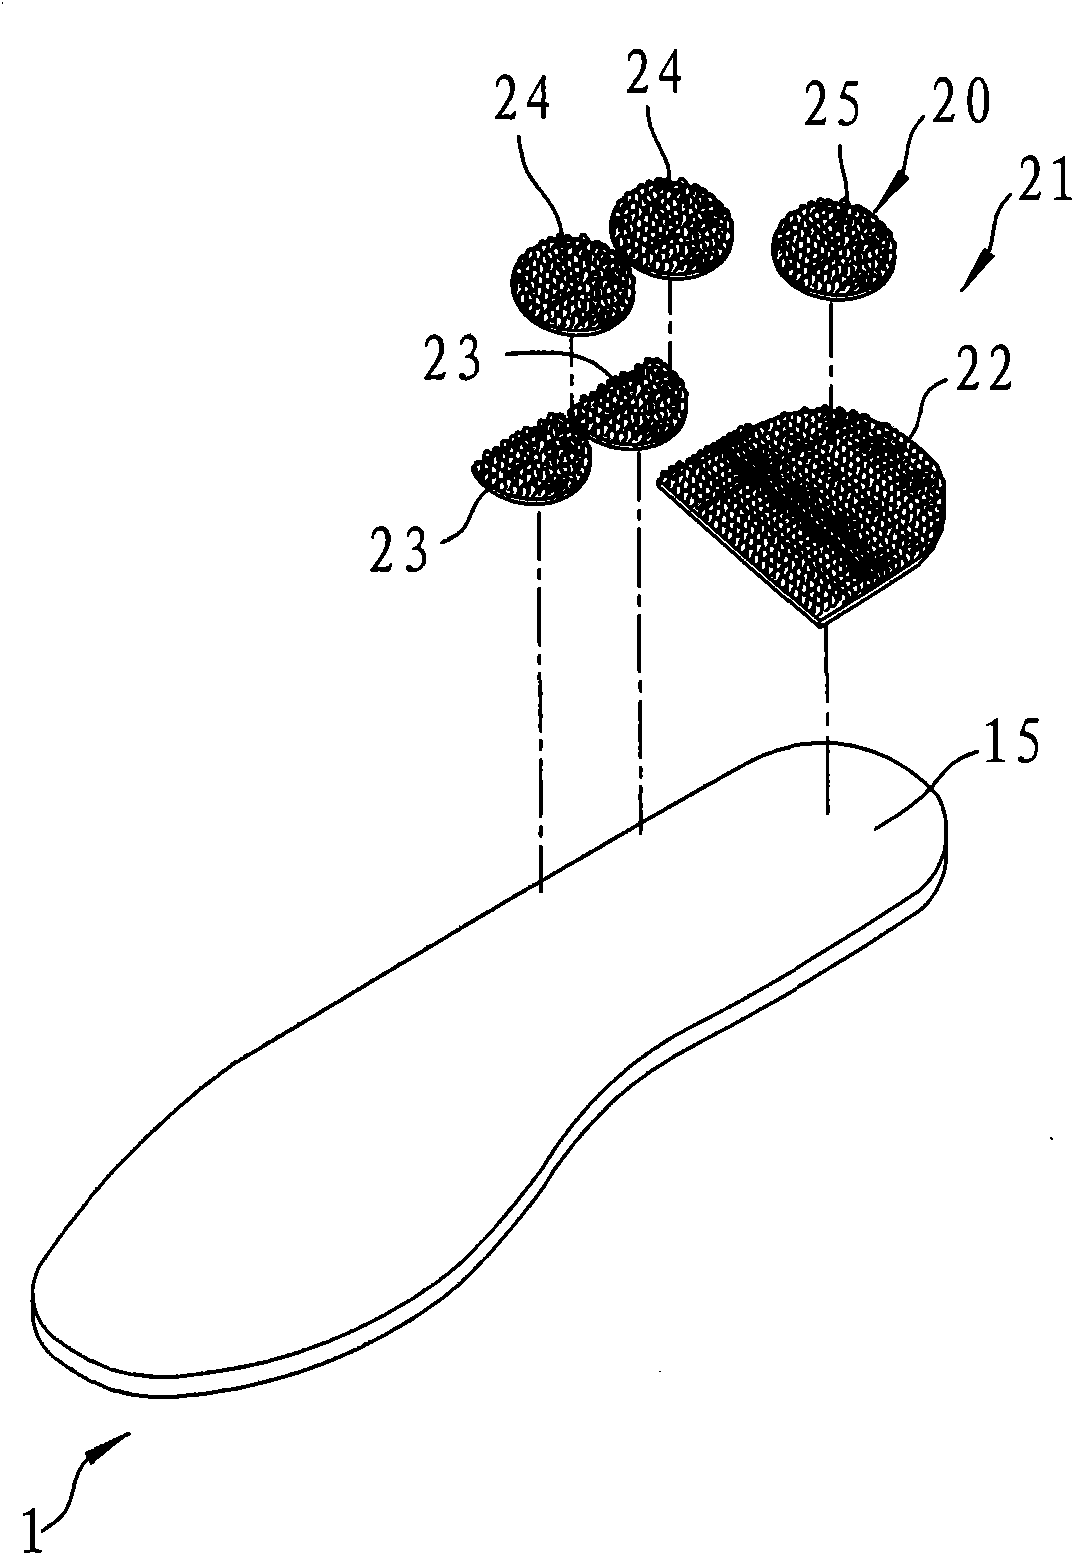 Arch corrective device shoe set and method for fine tuning of plantar pressure balance in same